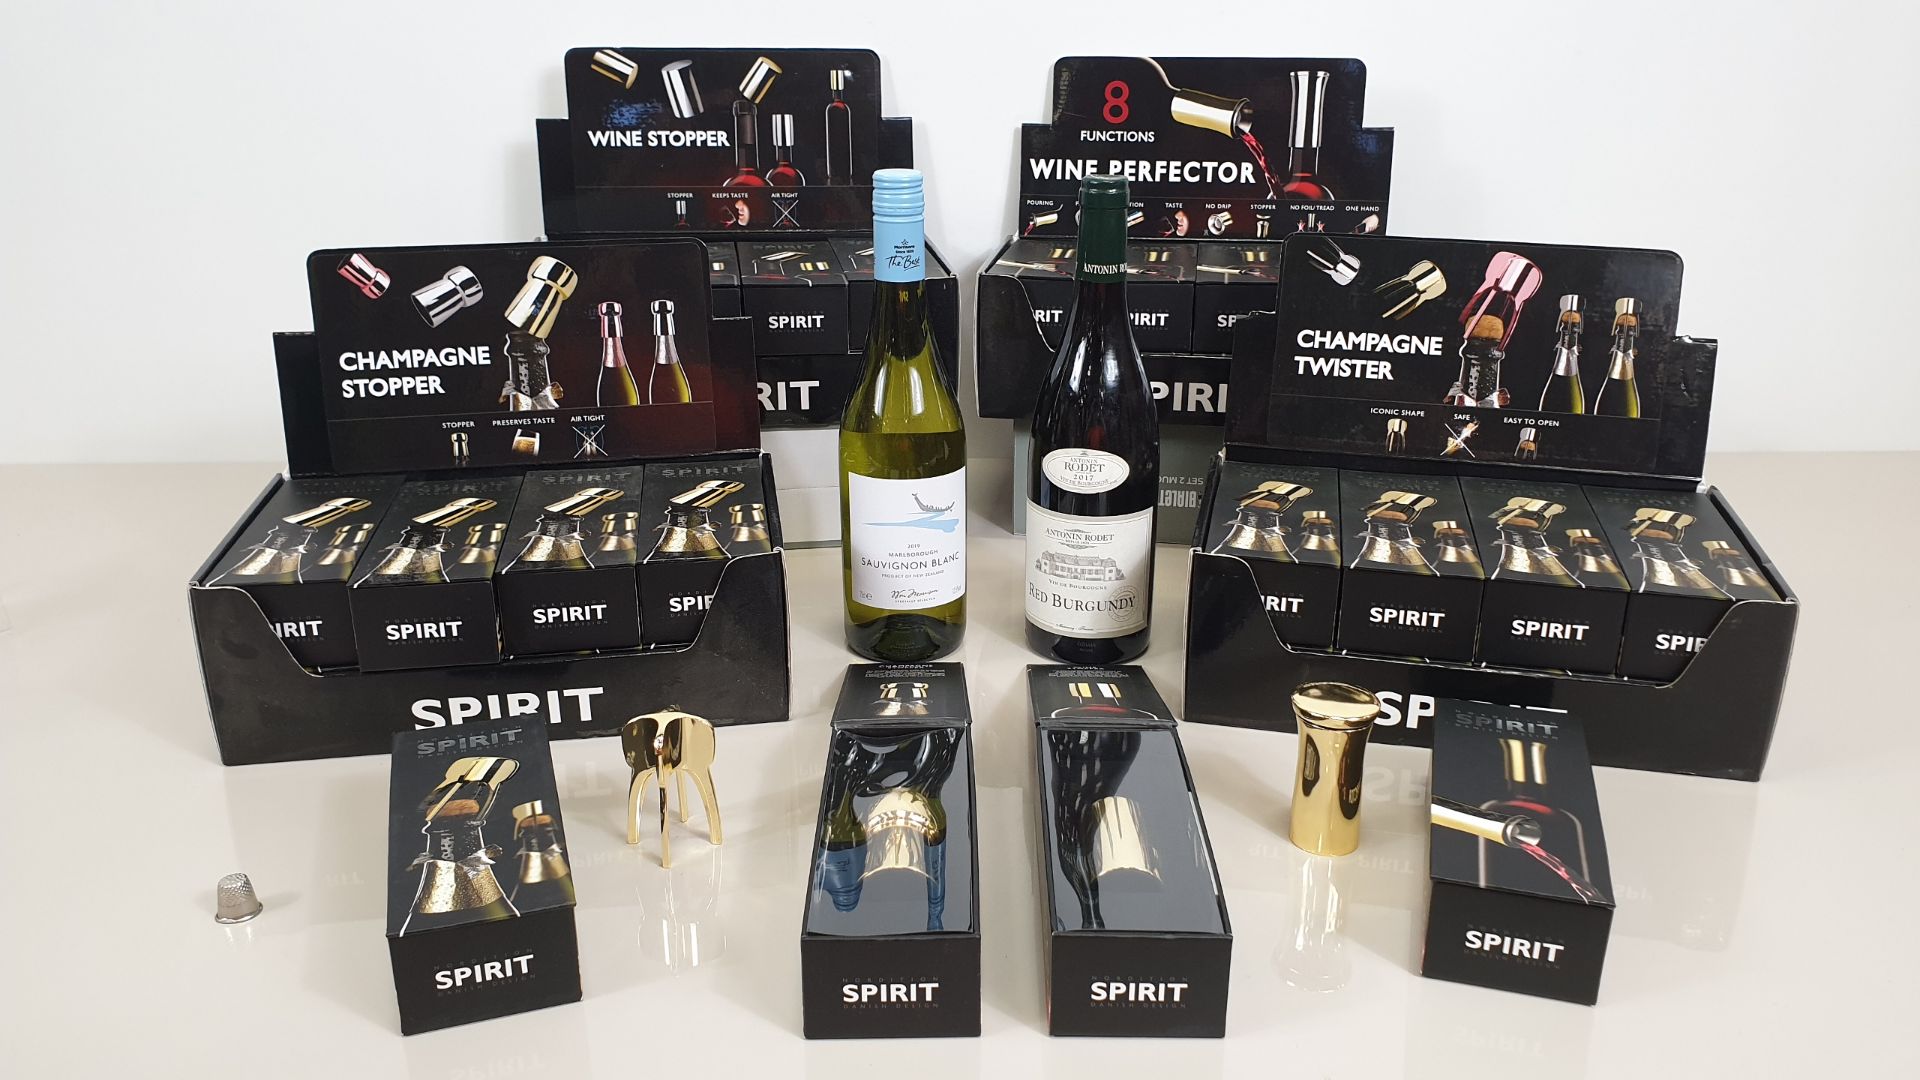 32 X NORDITION GOLD COLOURED SPIRIT CHAMPAGNE / WINE ACCESSORIES IN 4 DISPLAY CARTONS (8 X CHAMPAGNE